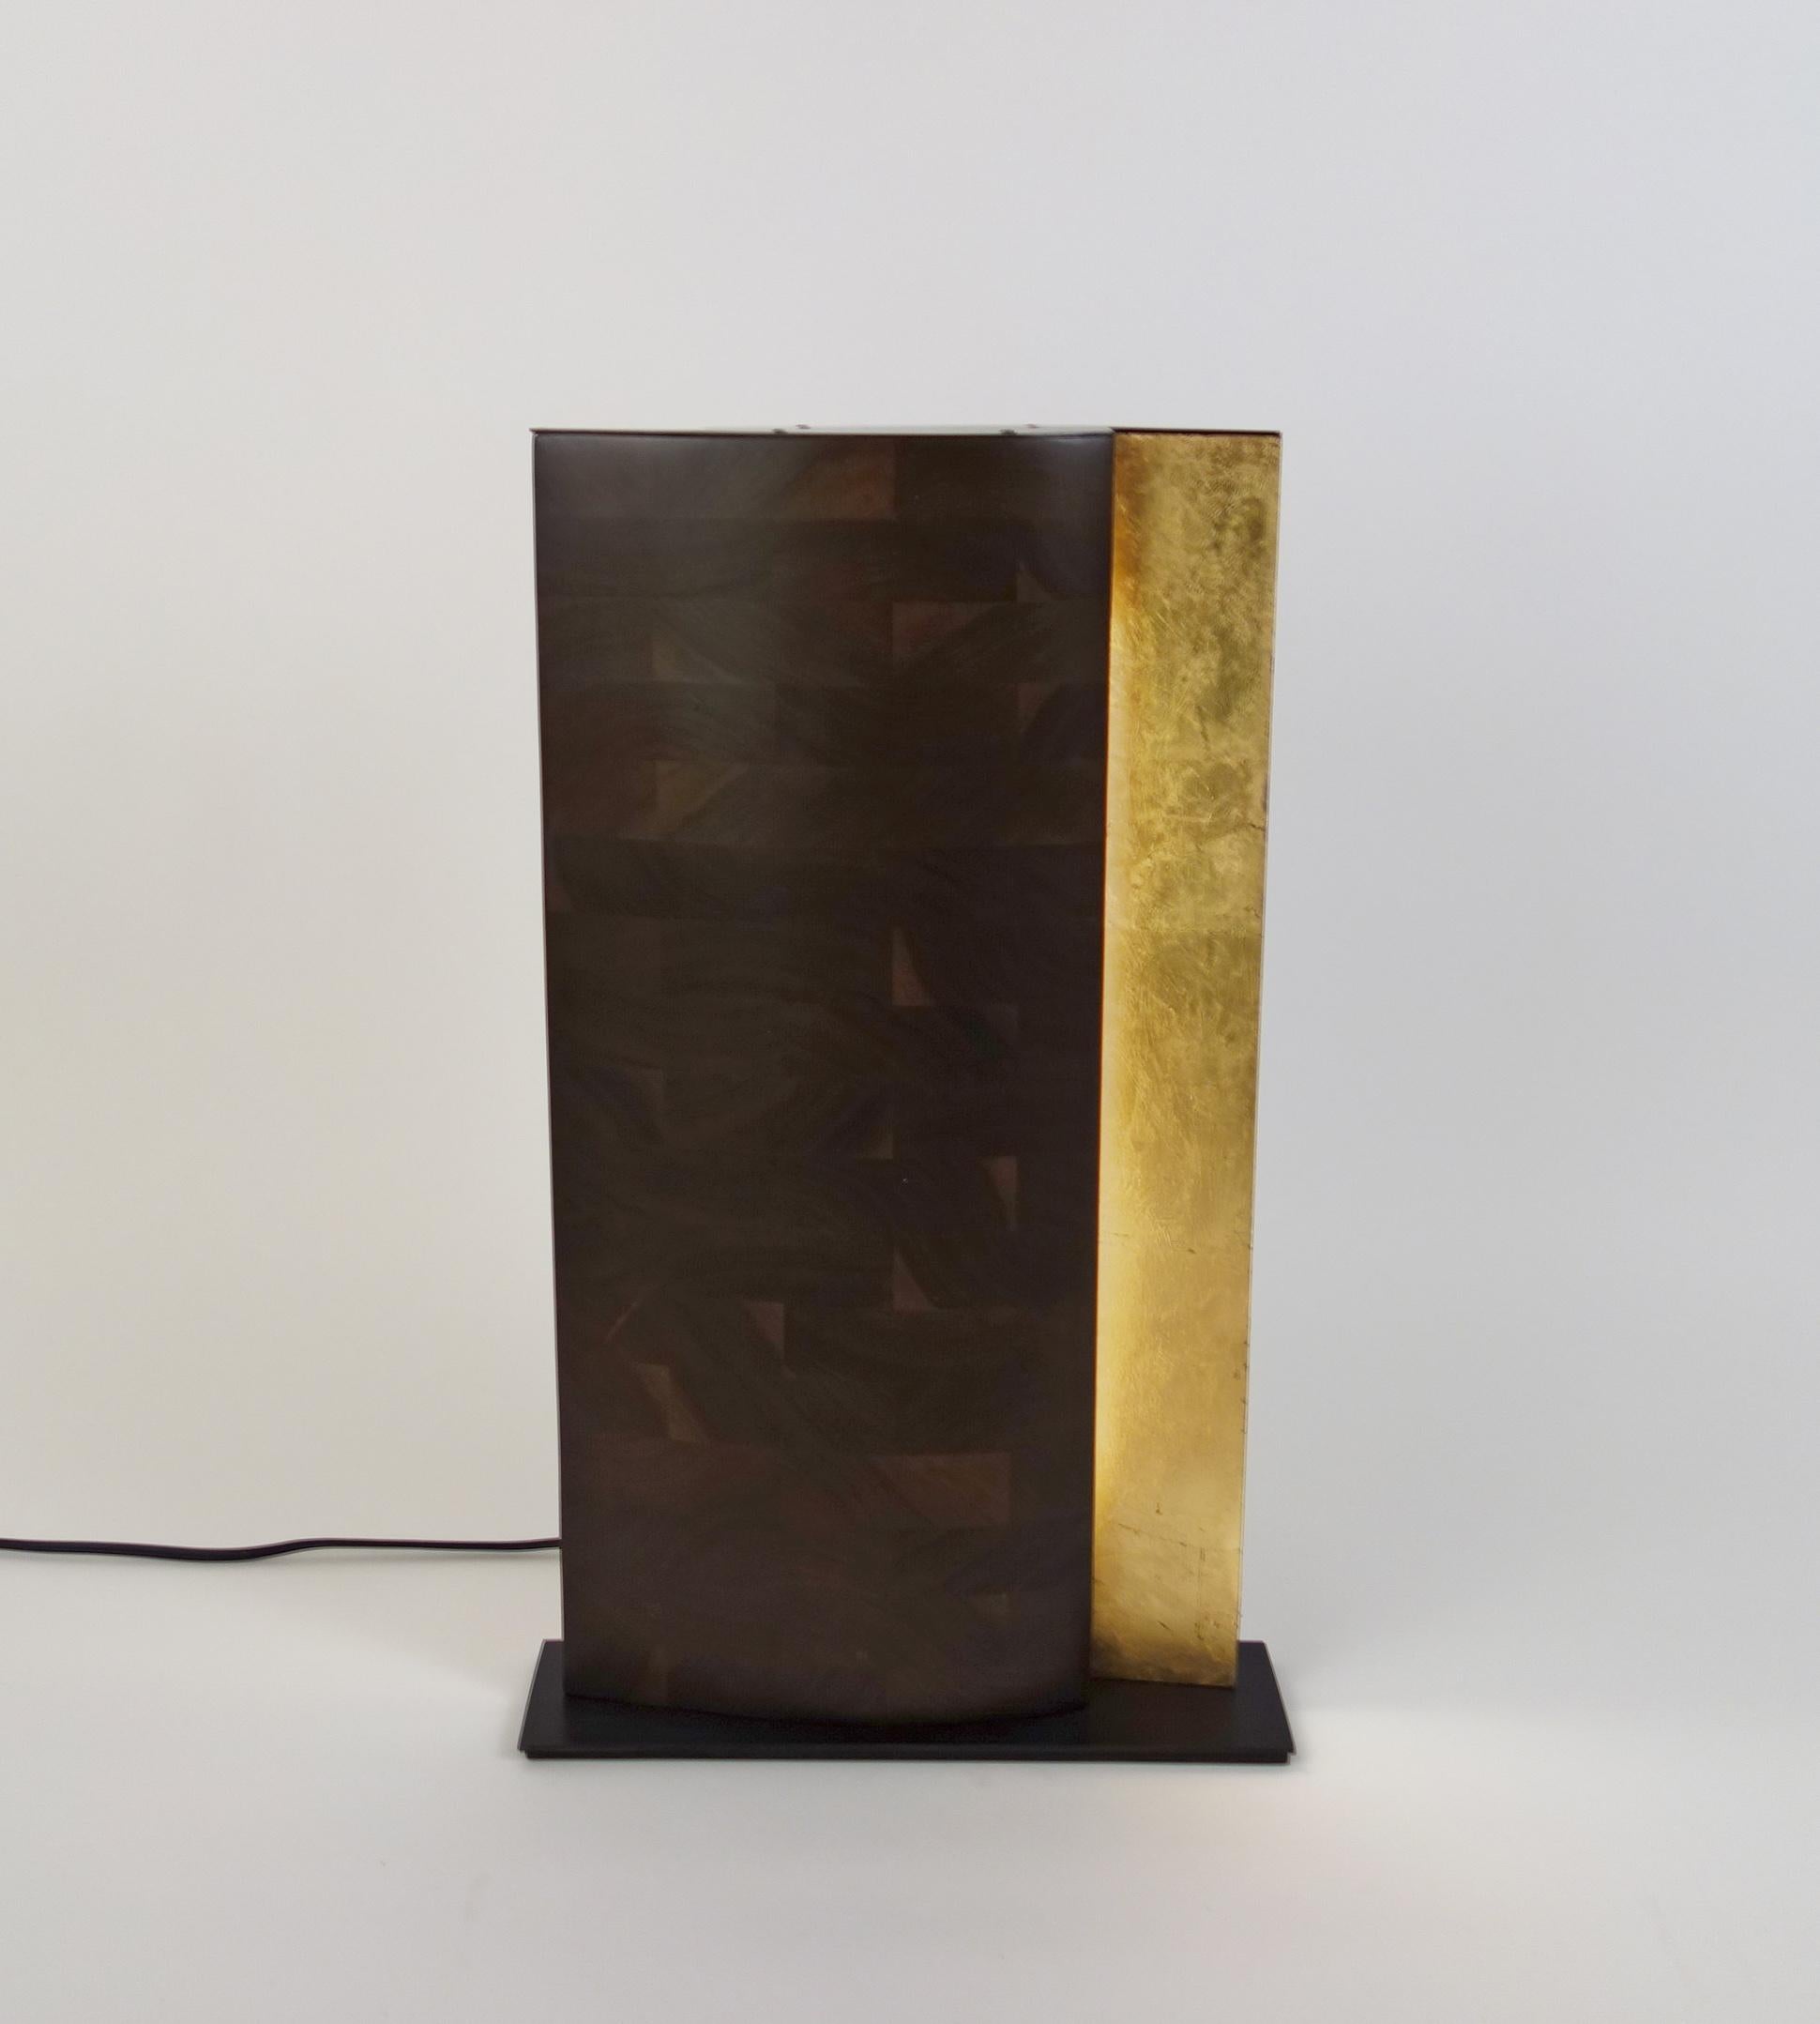 N2 Panel Lamp by Aaron Scott
Dimensions: D 11.5 x W 34.5 x H 57.5 cm
Materials: Walnut, blackened steel, acrylic, LED lamps, gold leaf.
Also available in other woods: bleached walnut. 

All our lamps can be wired according to each country. If